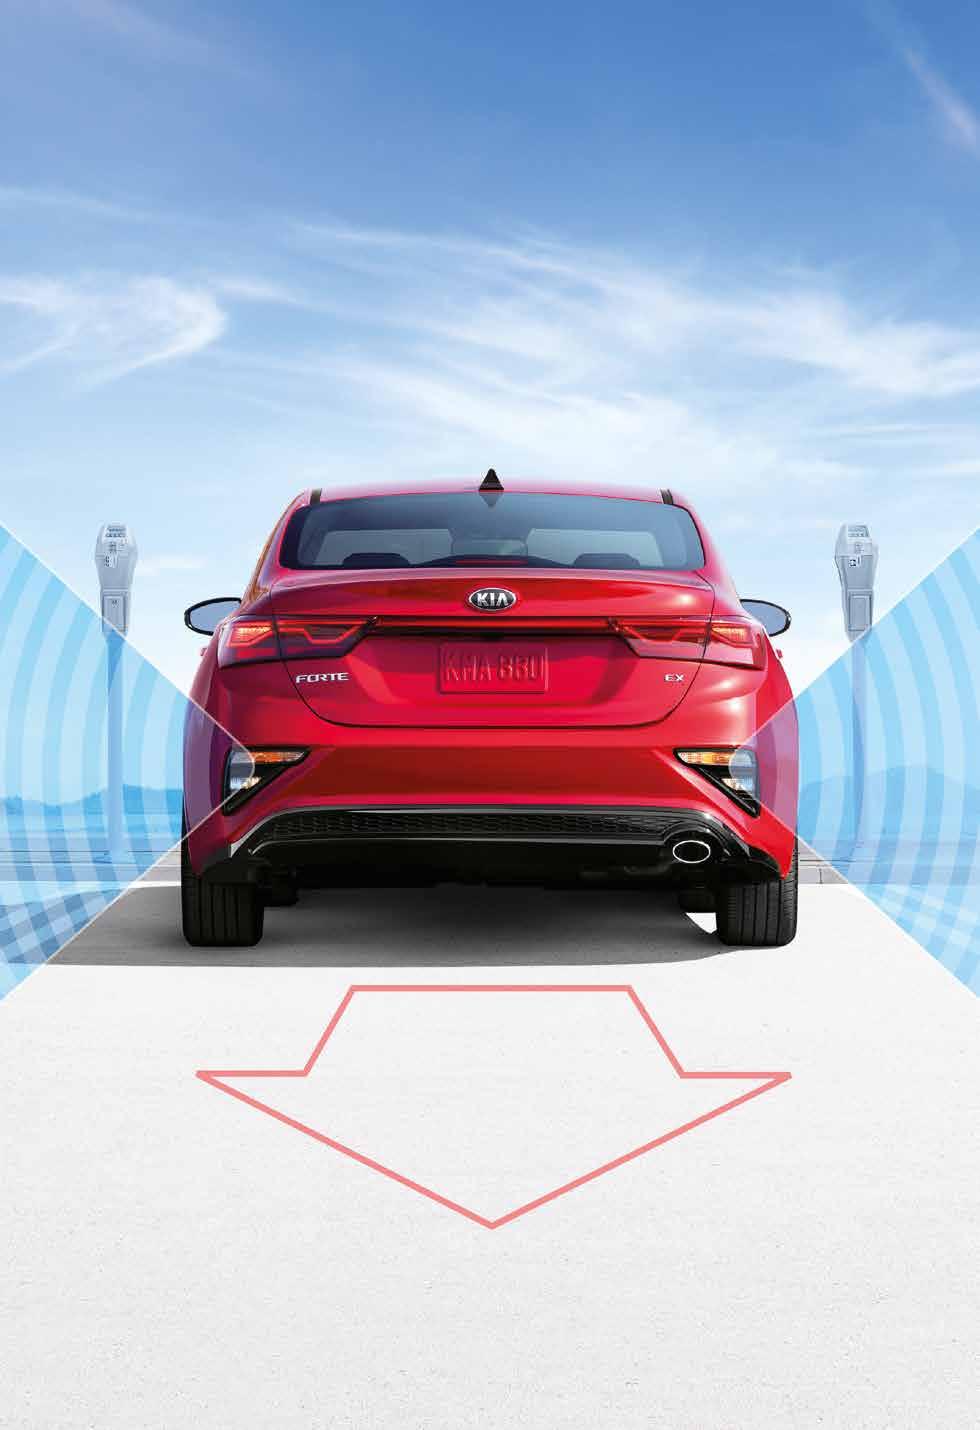 KIA.CA/FORTE SMART SEDAN It looks smart from the back BUT LOOKS ARE JUST THE START Whether your hands are full and you want to use the trunk, or you re backing out of